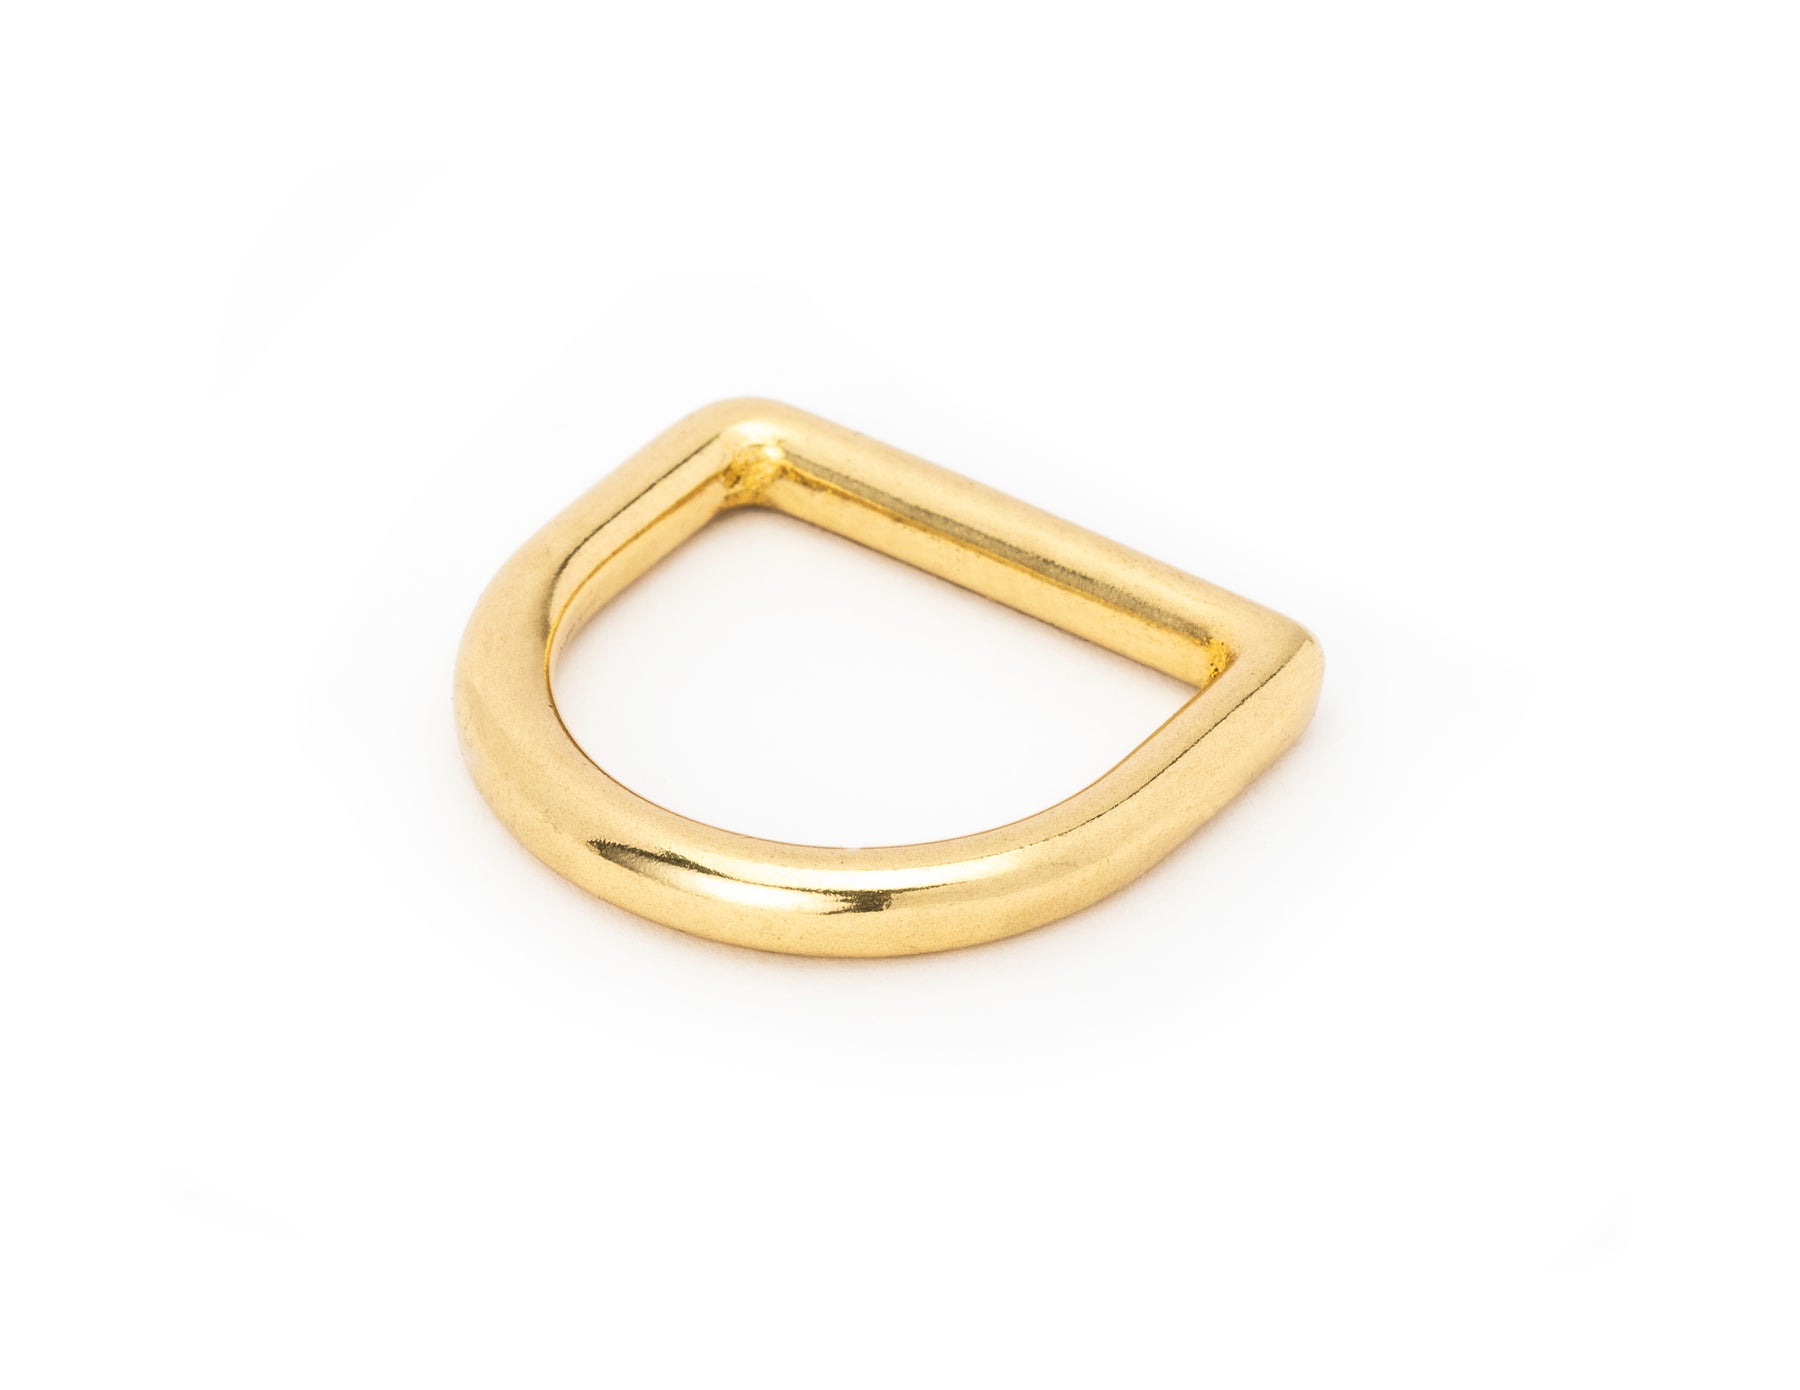 D Rings - Rounded "Thick Base" - (Solid Brass)